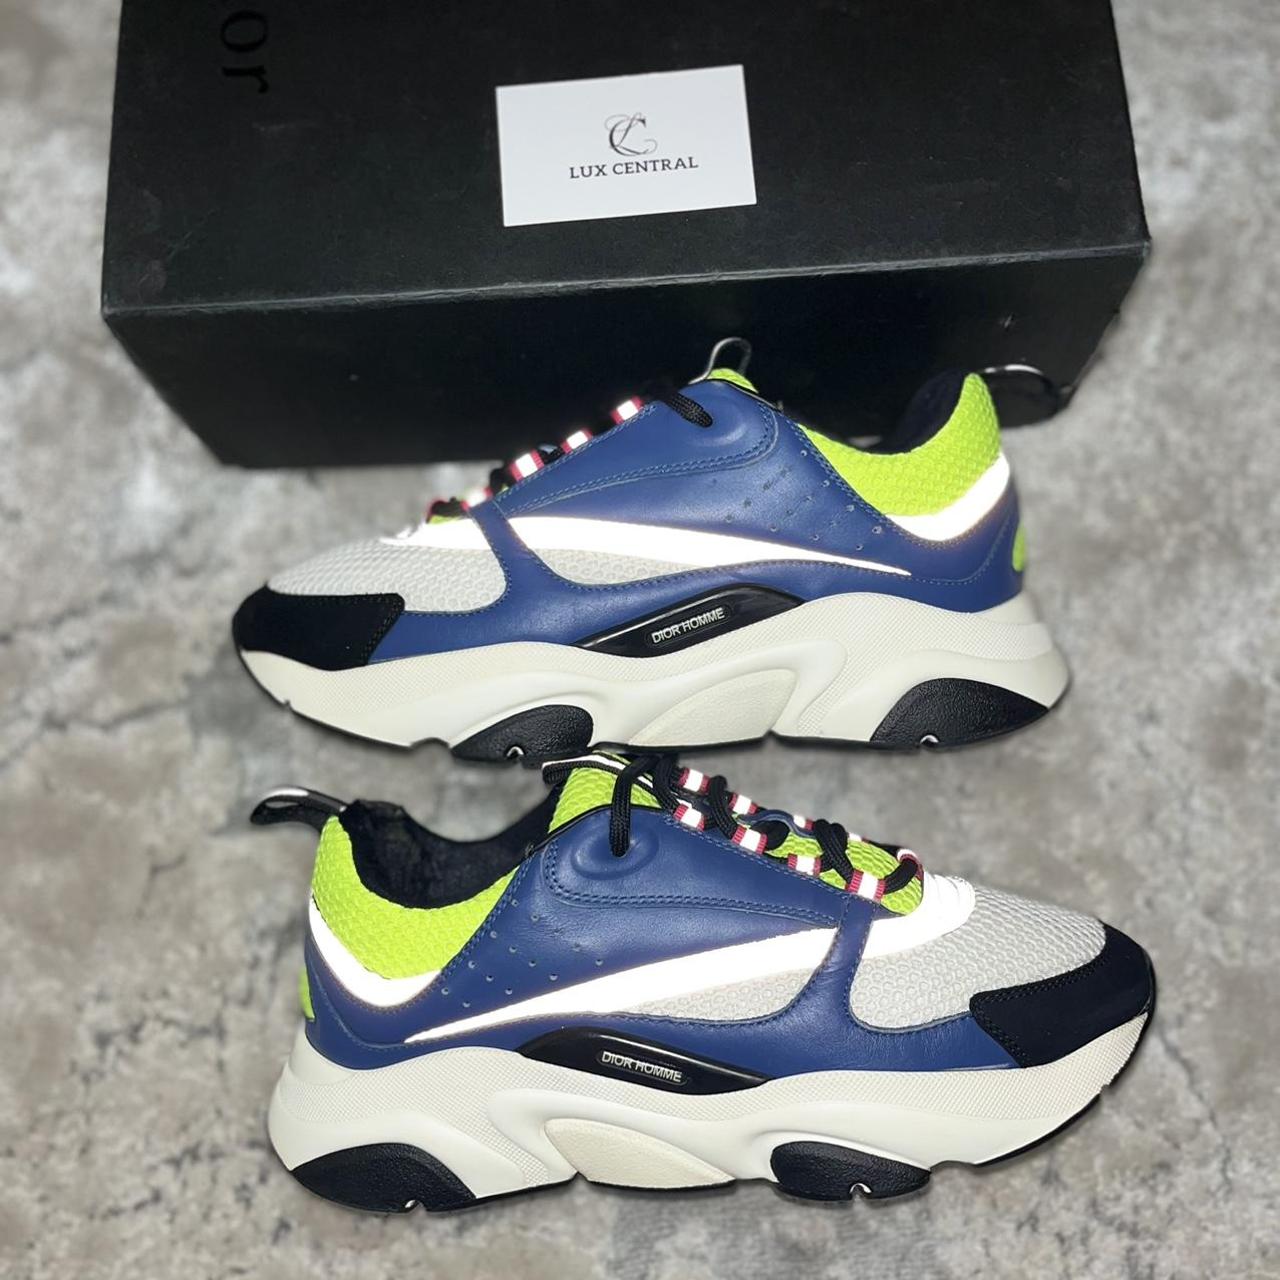 DIOR B22 Technical Neon Green / Blue and White UK 9... - Depop